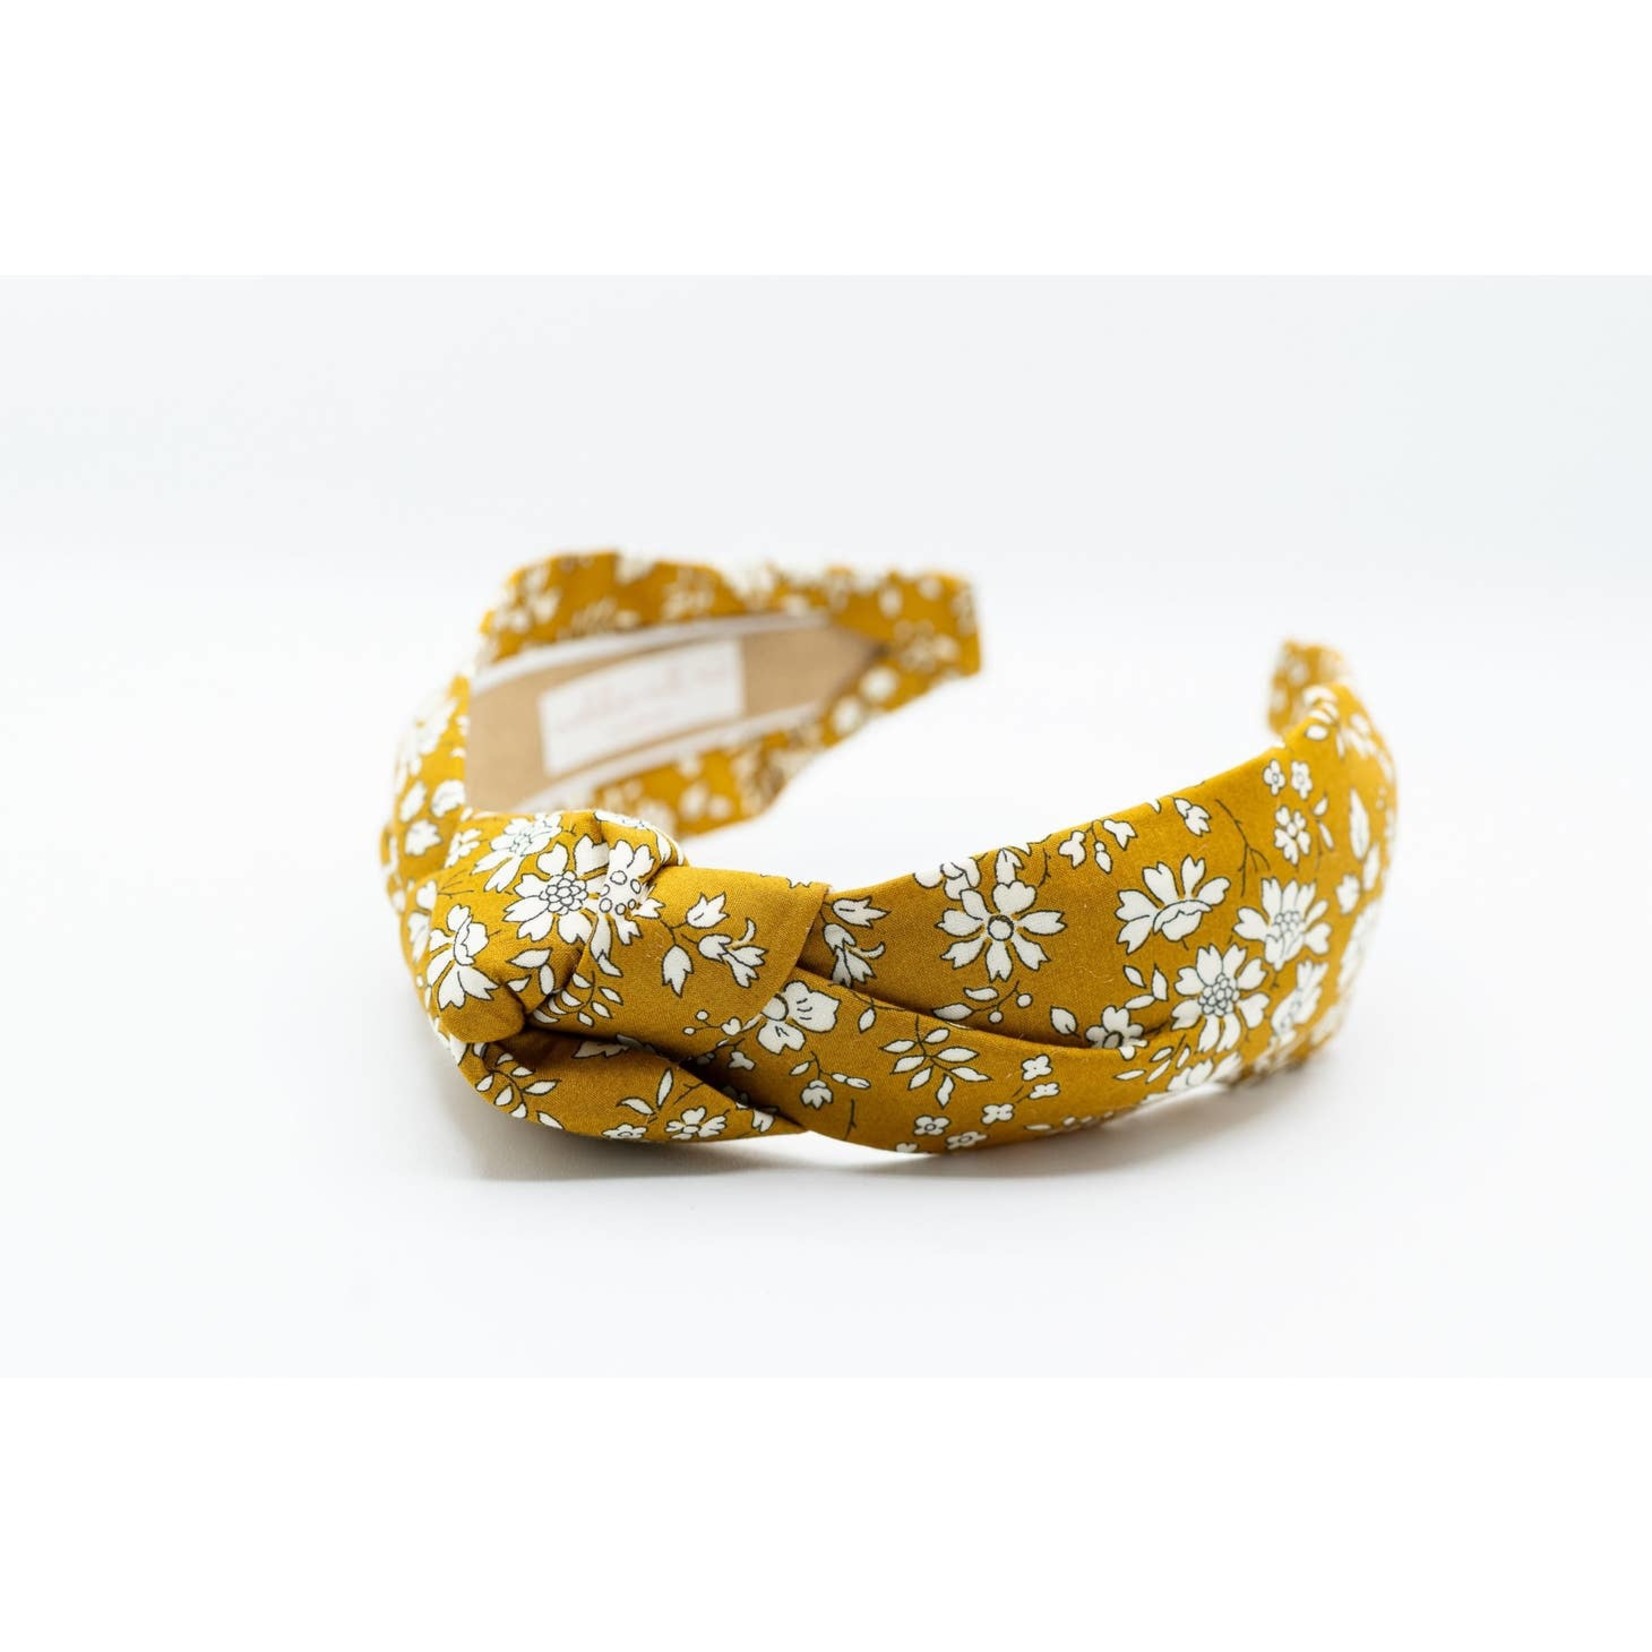 Maddie and Me Handmade Liberty of London Mustard Floral Knotted Headband